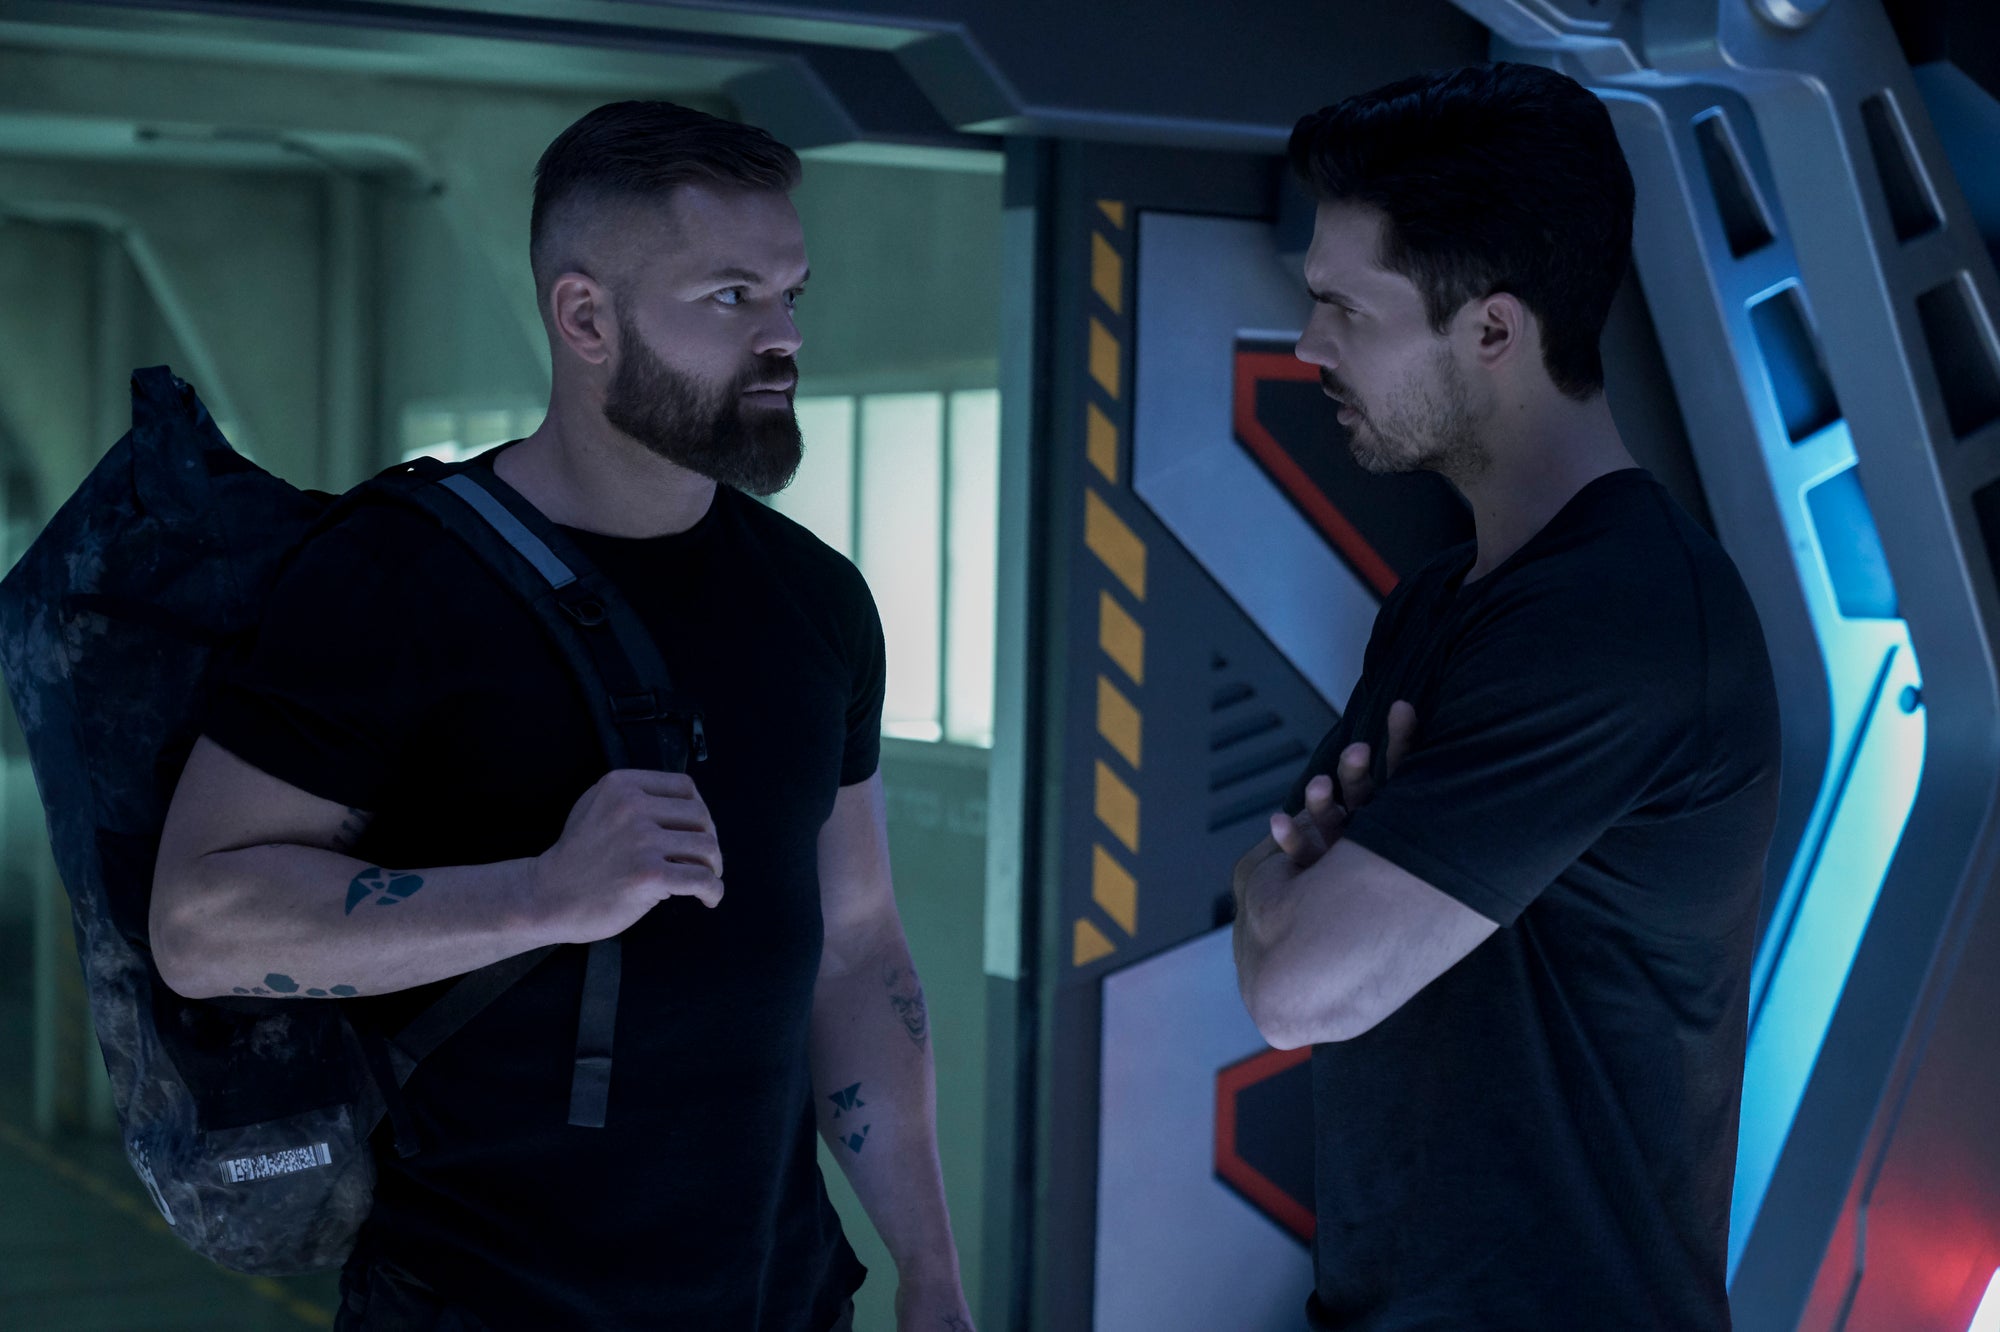 Amos and Holden have a friendly chat. Or a confrontation... hard to tell with those two. (Image: Amazon Studios)